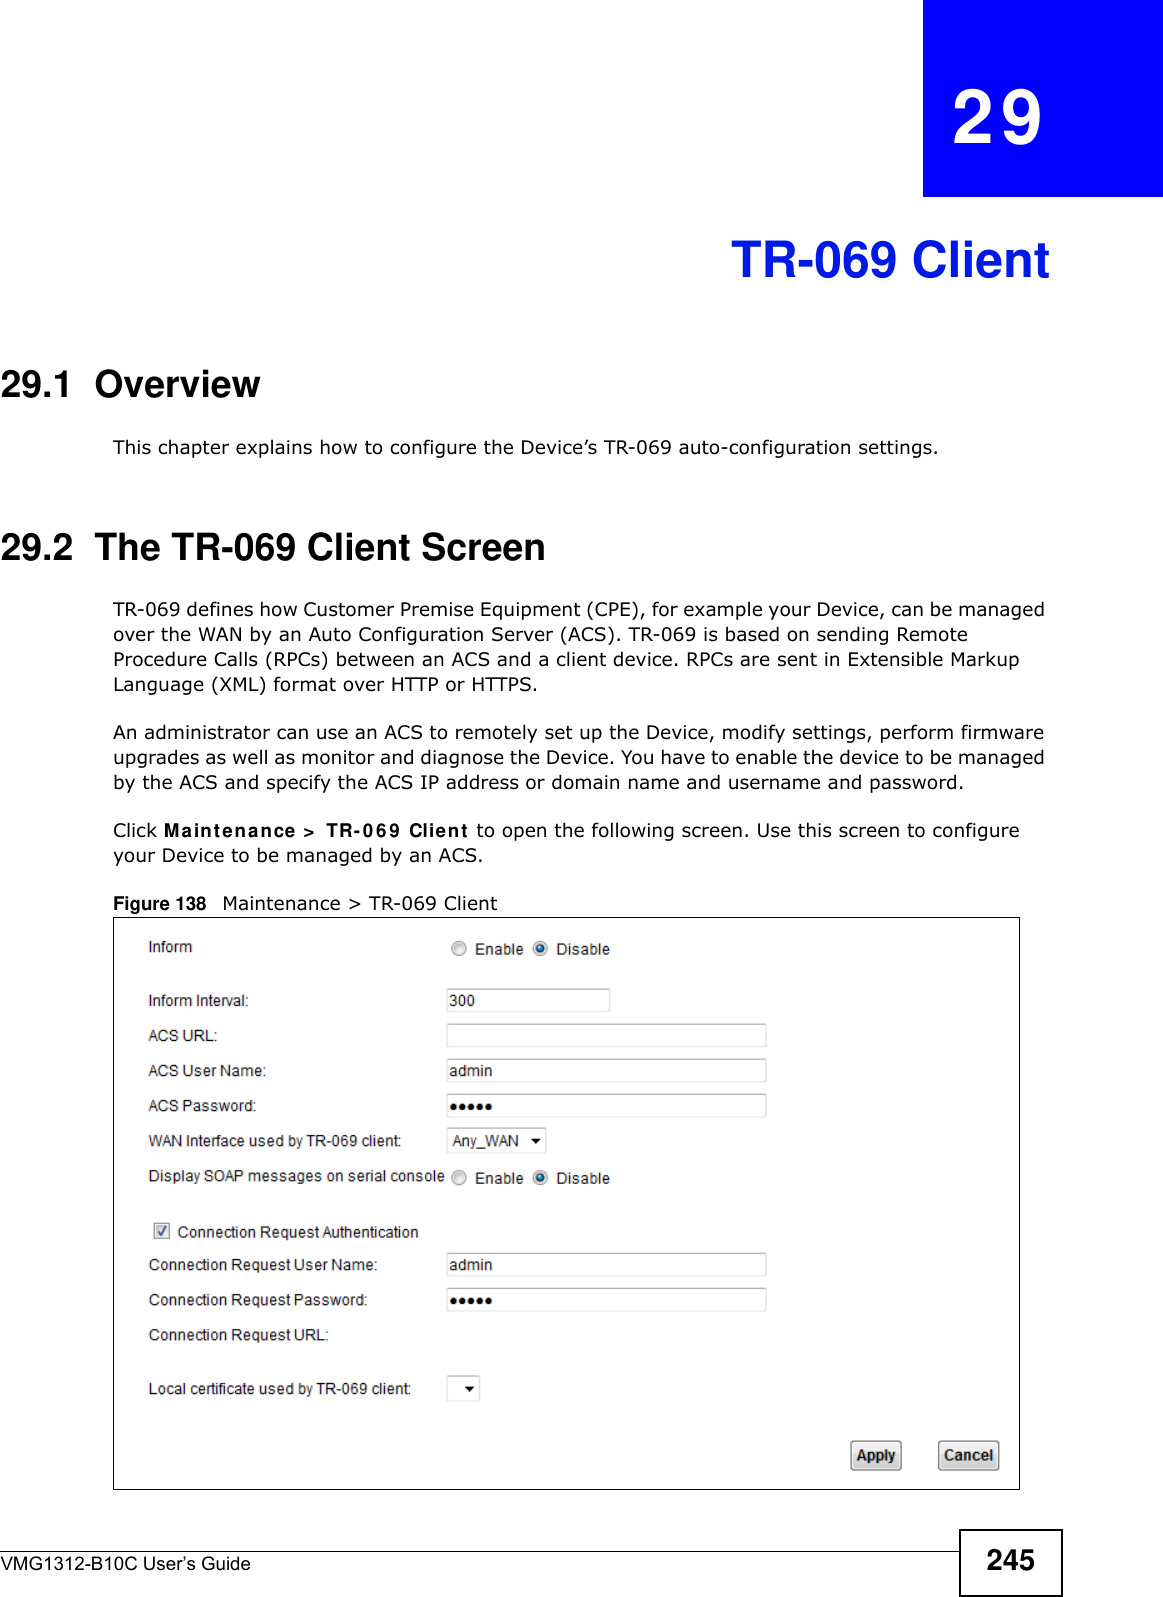 VMG1312-B10C User’s Guide 245CHAPTER   29TR-069 Client29.1  OverviewThis chapter explains how to configure the Device’s TR-069 auto-configuration settings.29.2  The TR-069 Client ScreenTR-069 defines how Customer Premise Equipment (CPE), for example your Device, can be managed over the WAN by an Auto Configuration Server (ACS). TR-069 is based on sending Remote Procedure Calls (RPCs) between an ACS and a client device. RPCs are sent in Extensible Markup Language (XML) format over HTTP or HTTPS. An administrator can use an ACS to remotely set up the Device, modify settings, perform firmware upgrades as well as monitor and diagnose the Device. You have to enable the device to be managed by the ACS and specify the ACS IP address or domain name and username and password.Click M a in t e n a nce &gt;  TR- 0 6 9  Clie n t  to open the following screen. Use this screen to configure your Device to be managed by an ACS. Figure 138   Maintenance &gt; TR-069 Client 